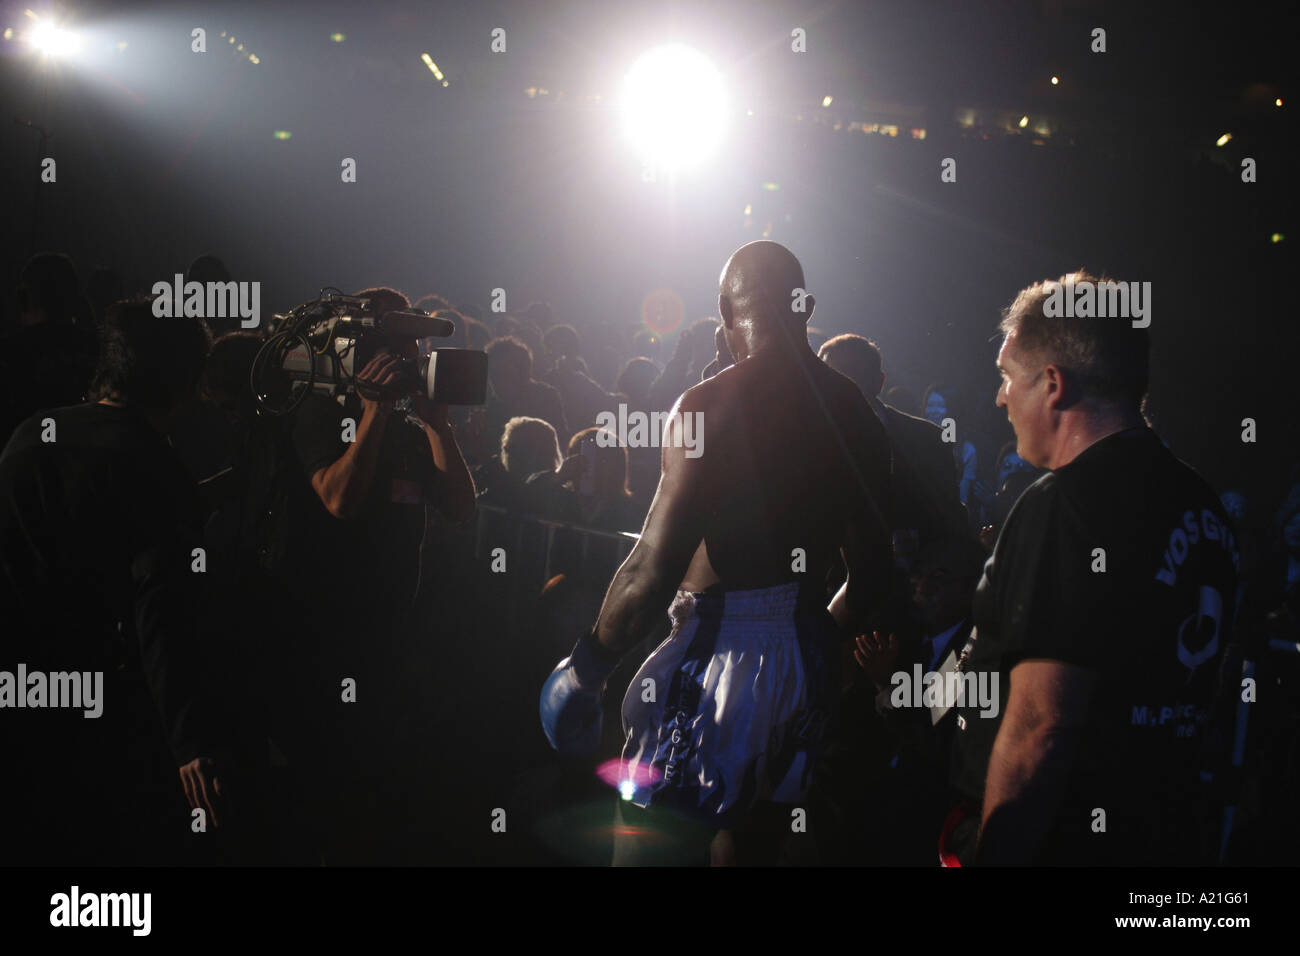 Televison crew follow a sportsman as he exits the ring, K1 fighting, Tokyo, Japan, Asia. Stock Photo